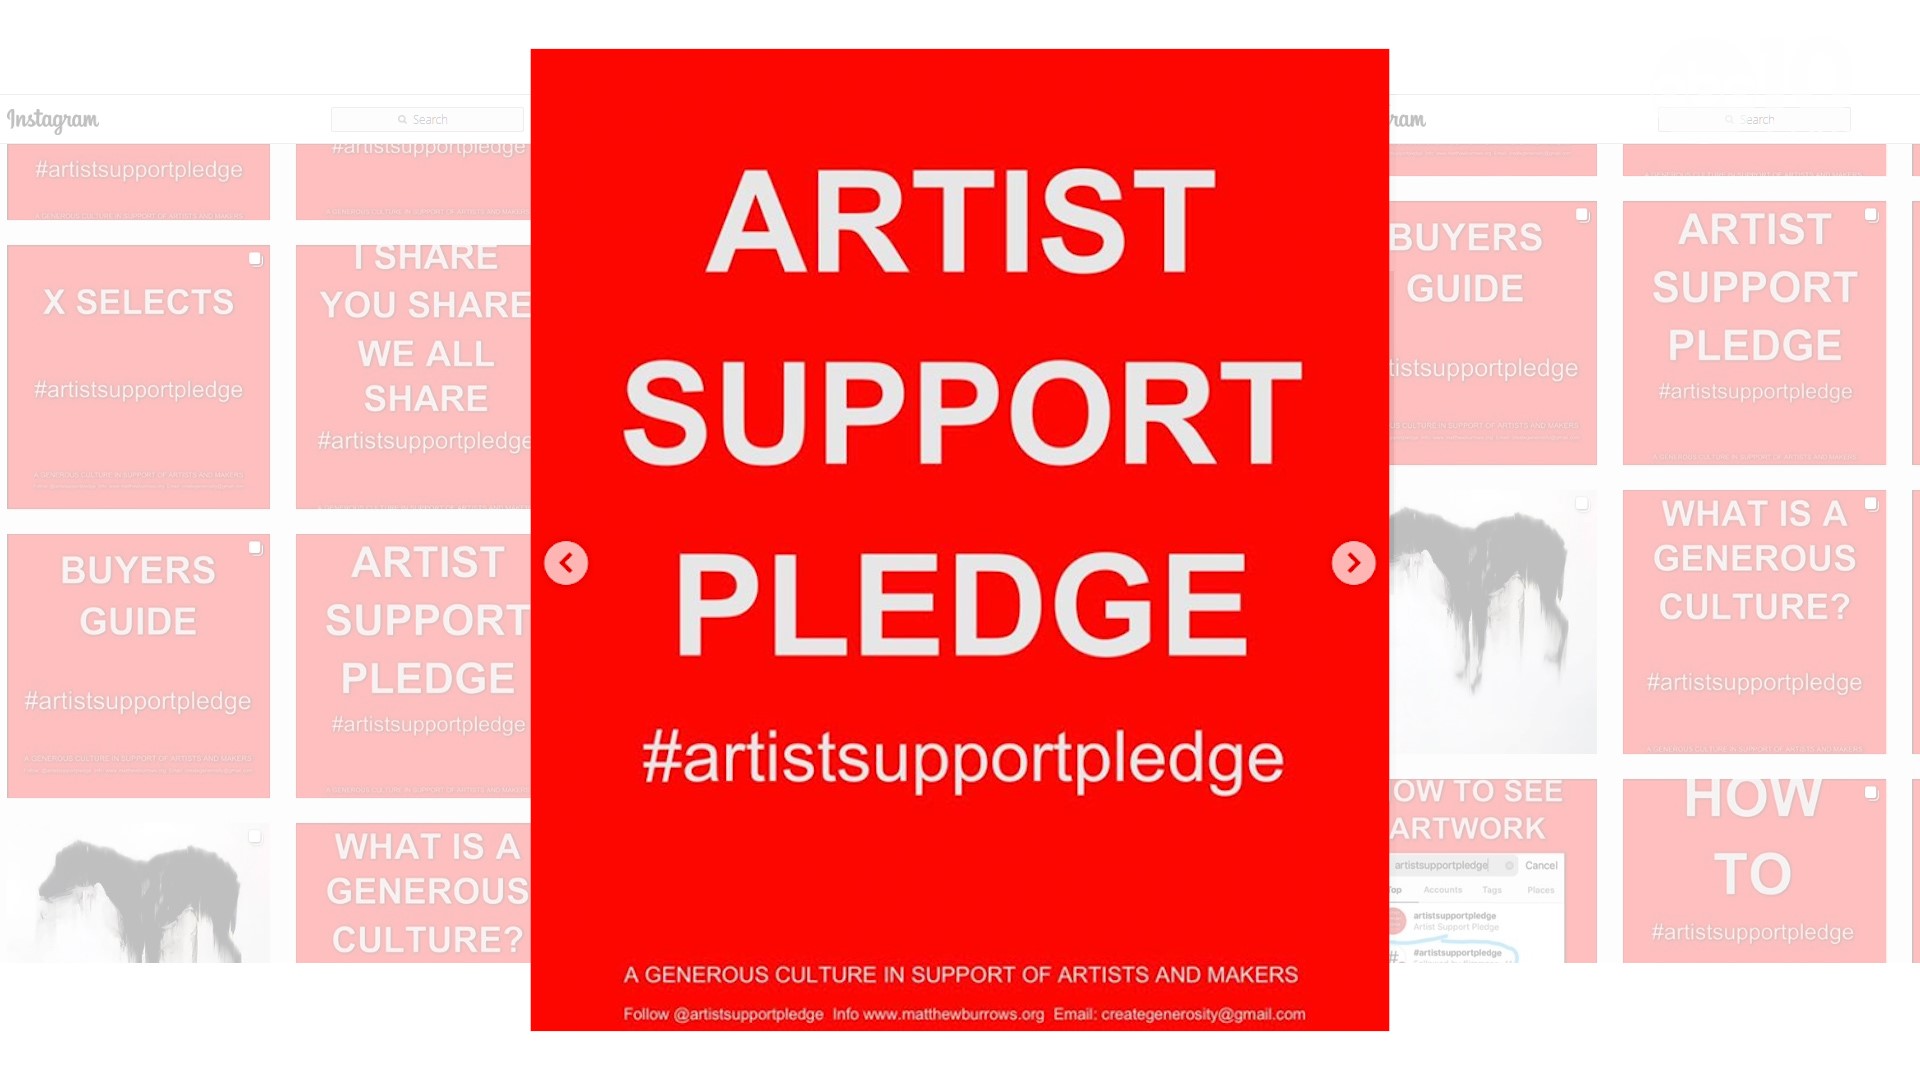 Artists in Sacramento and all over the world are supporting fellow artists through #artistsupportpledge.